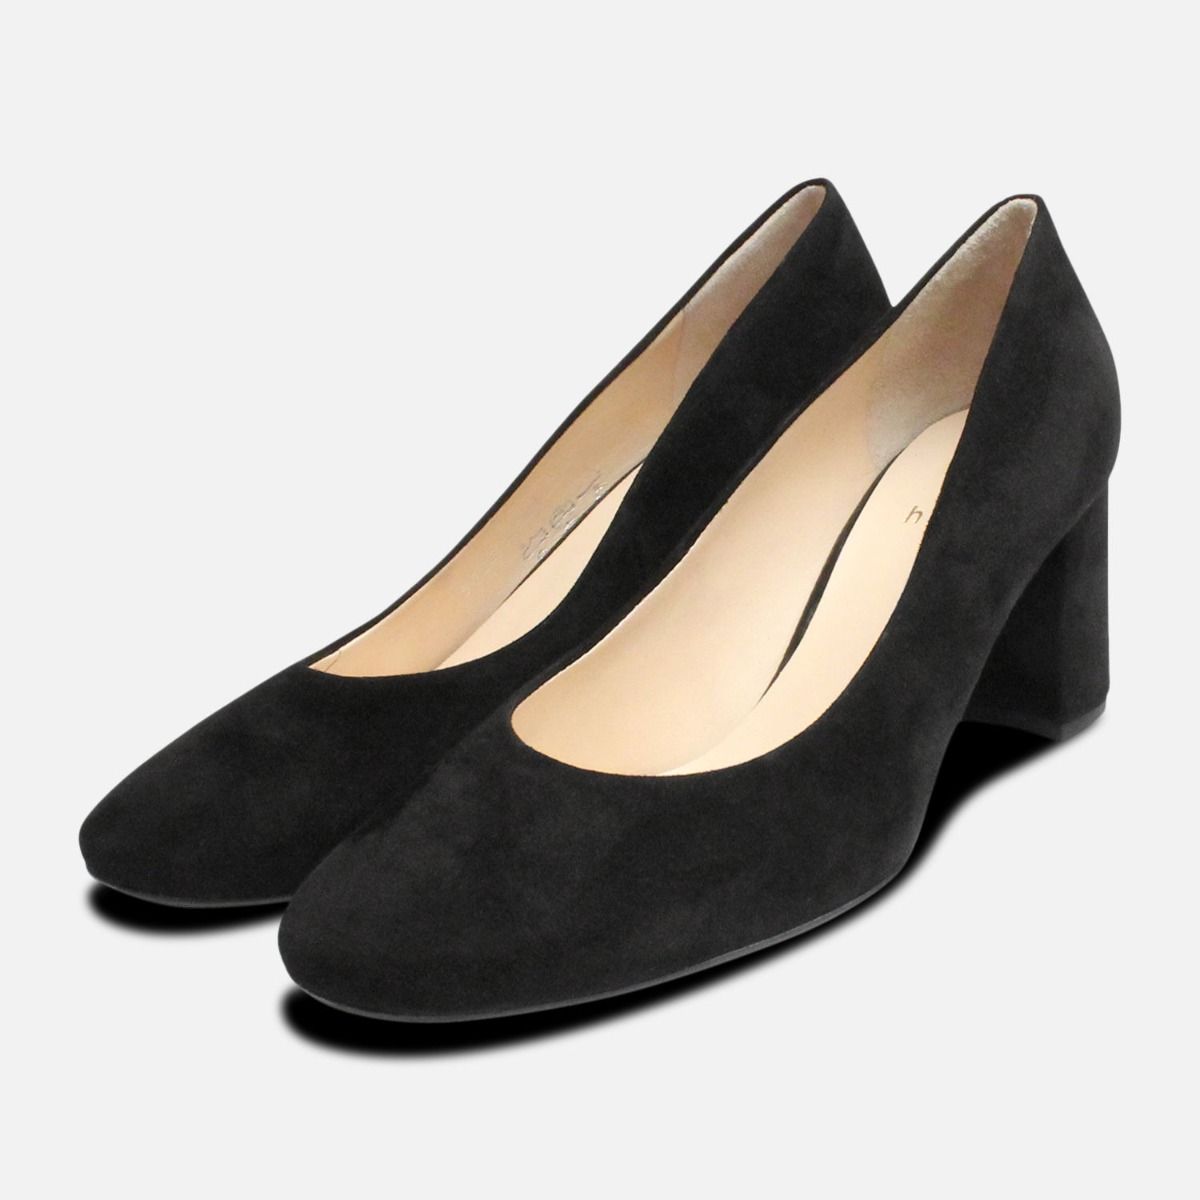 suede shoes for ladies